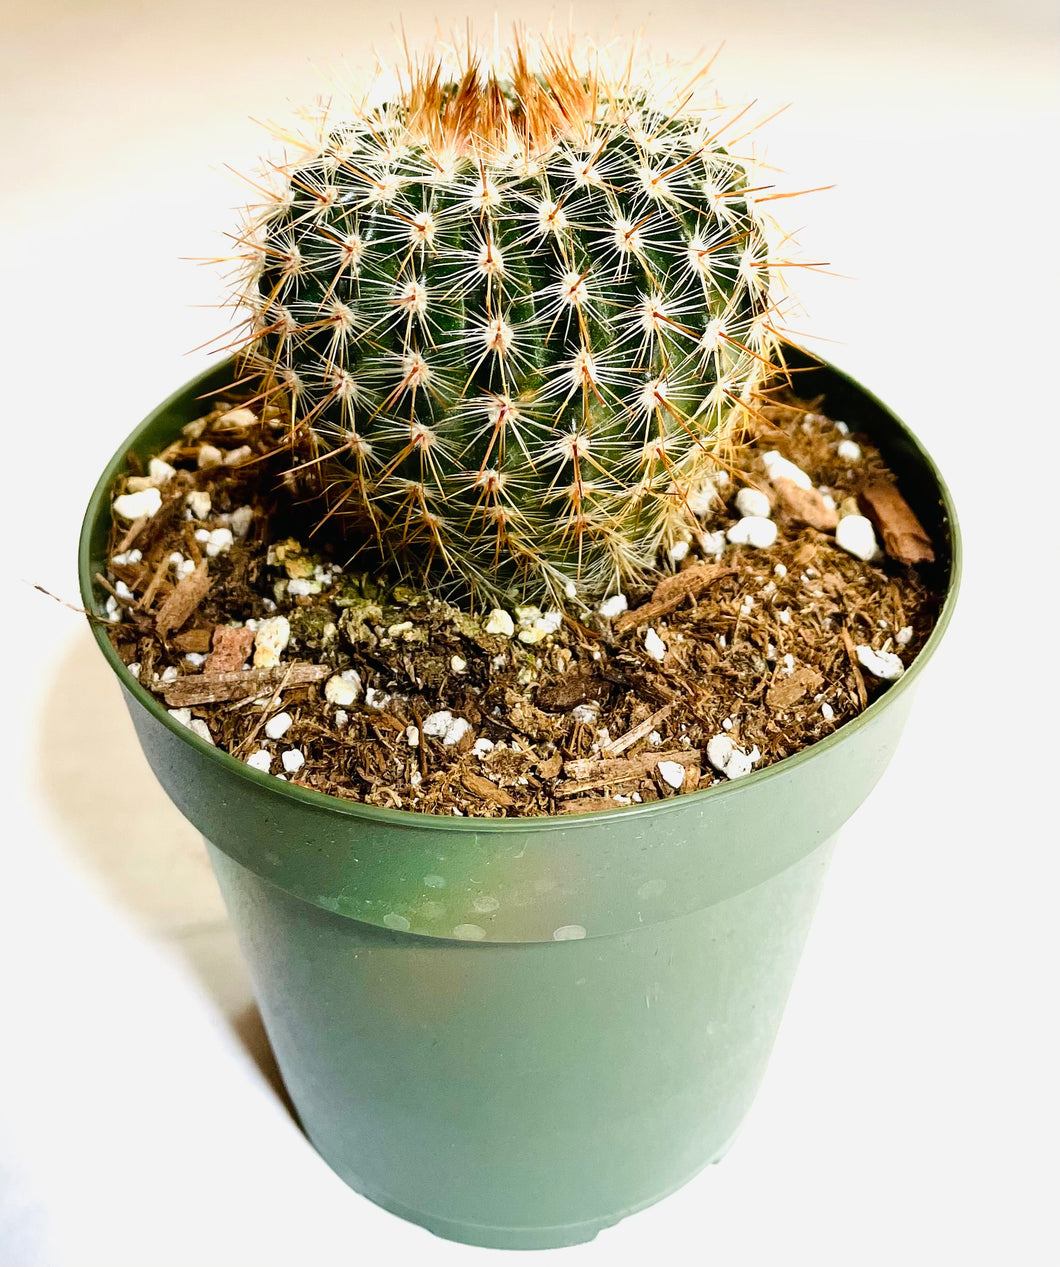 A small globe-shaped cactus with many white bristle-like spines. The spines forming at the top of the cactus are a gold color.